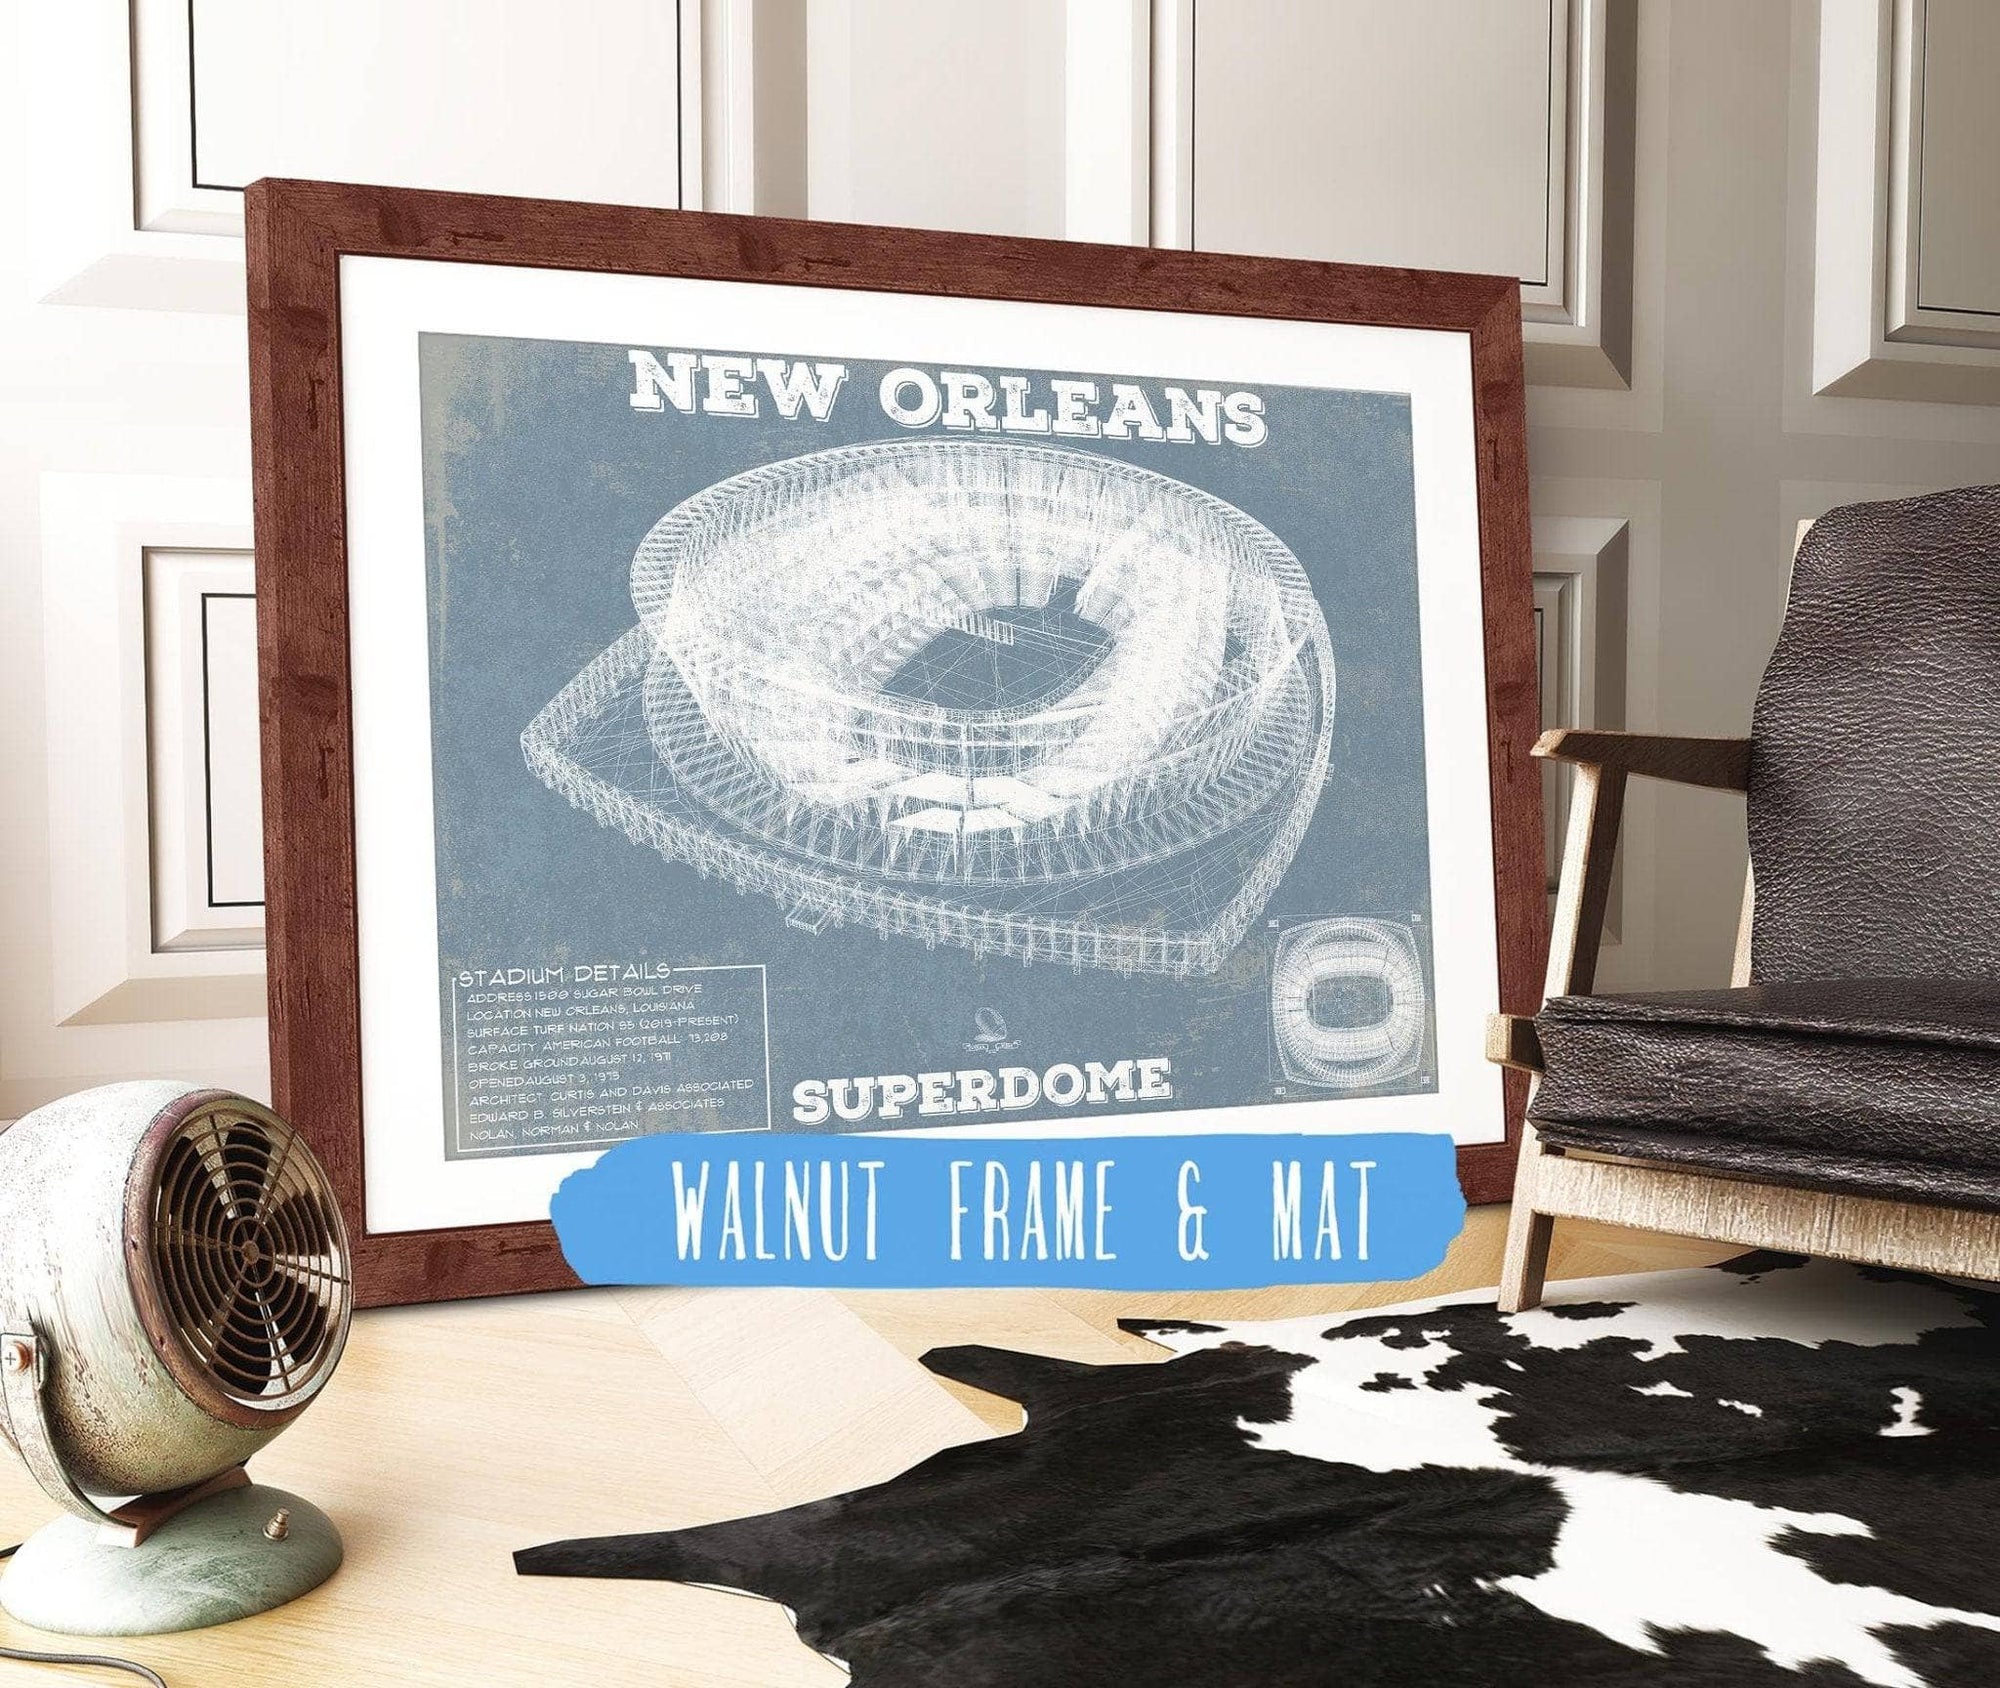 Cutler West Pro Football Collection 14" x 11" / Walnut Frame & Mat New Orleans Saints Superdome Seating Chart - Vintage Football  Team Color Print 235353090